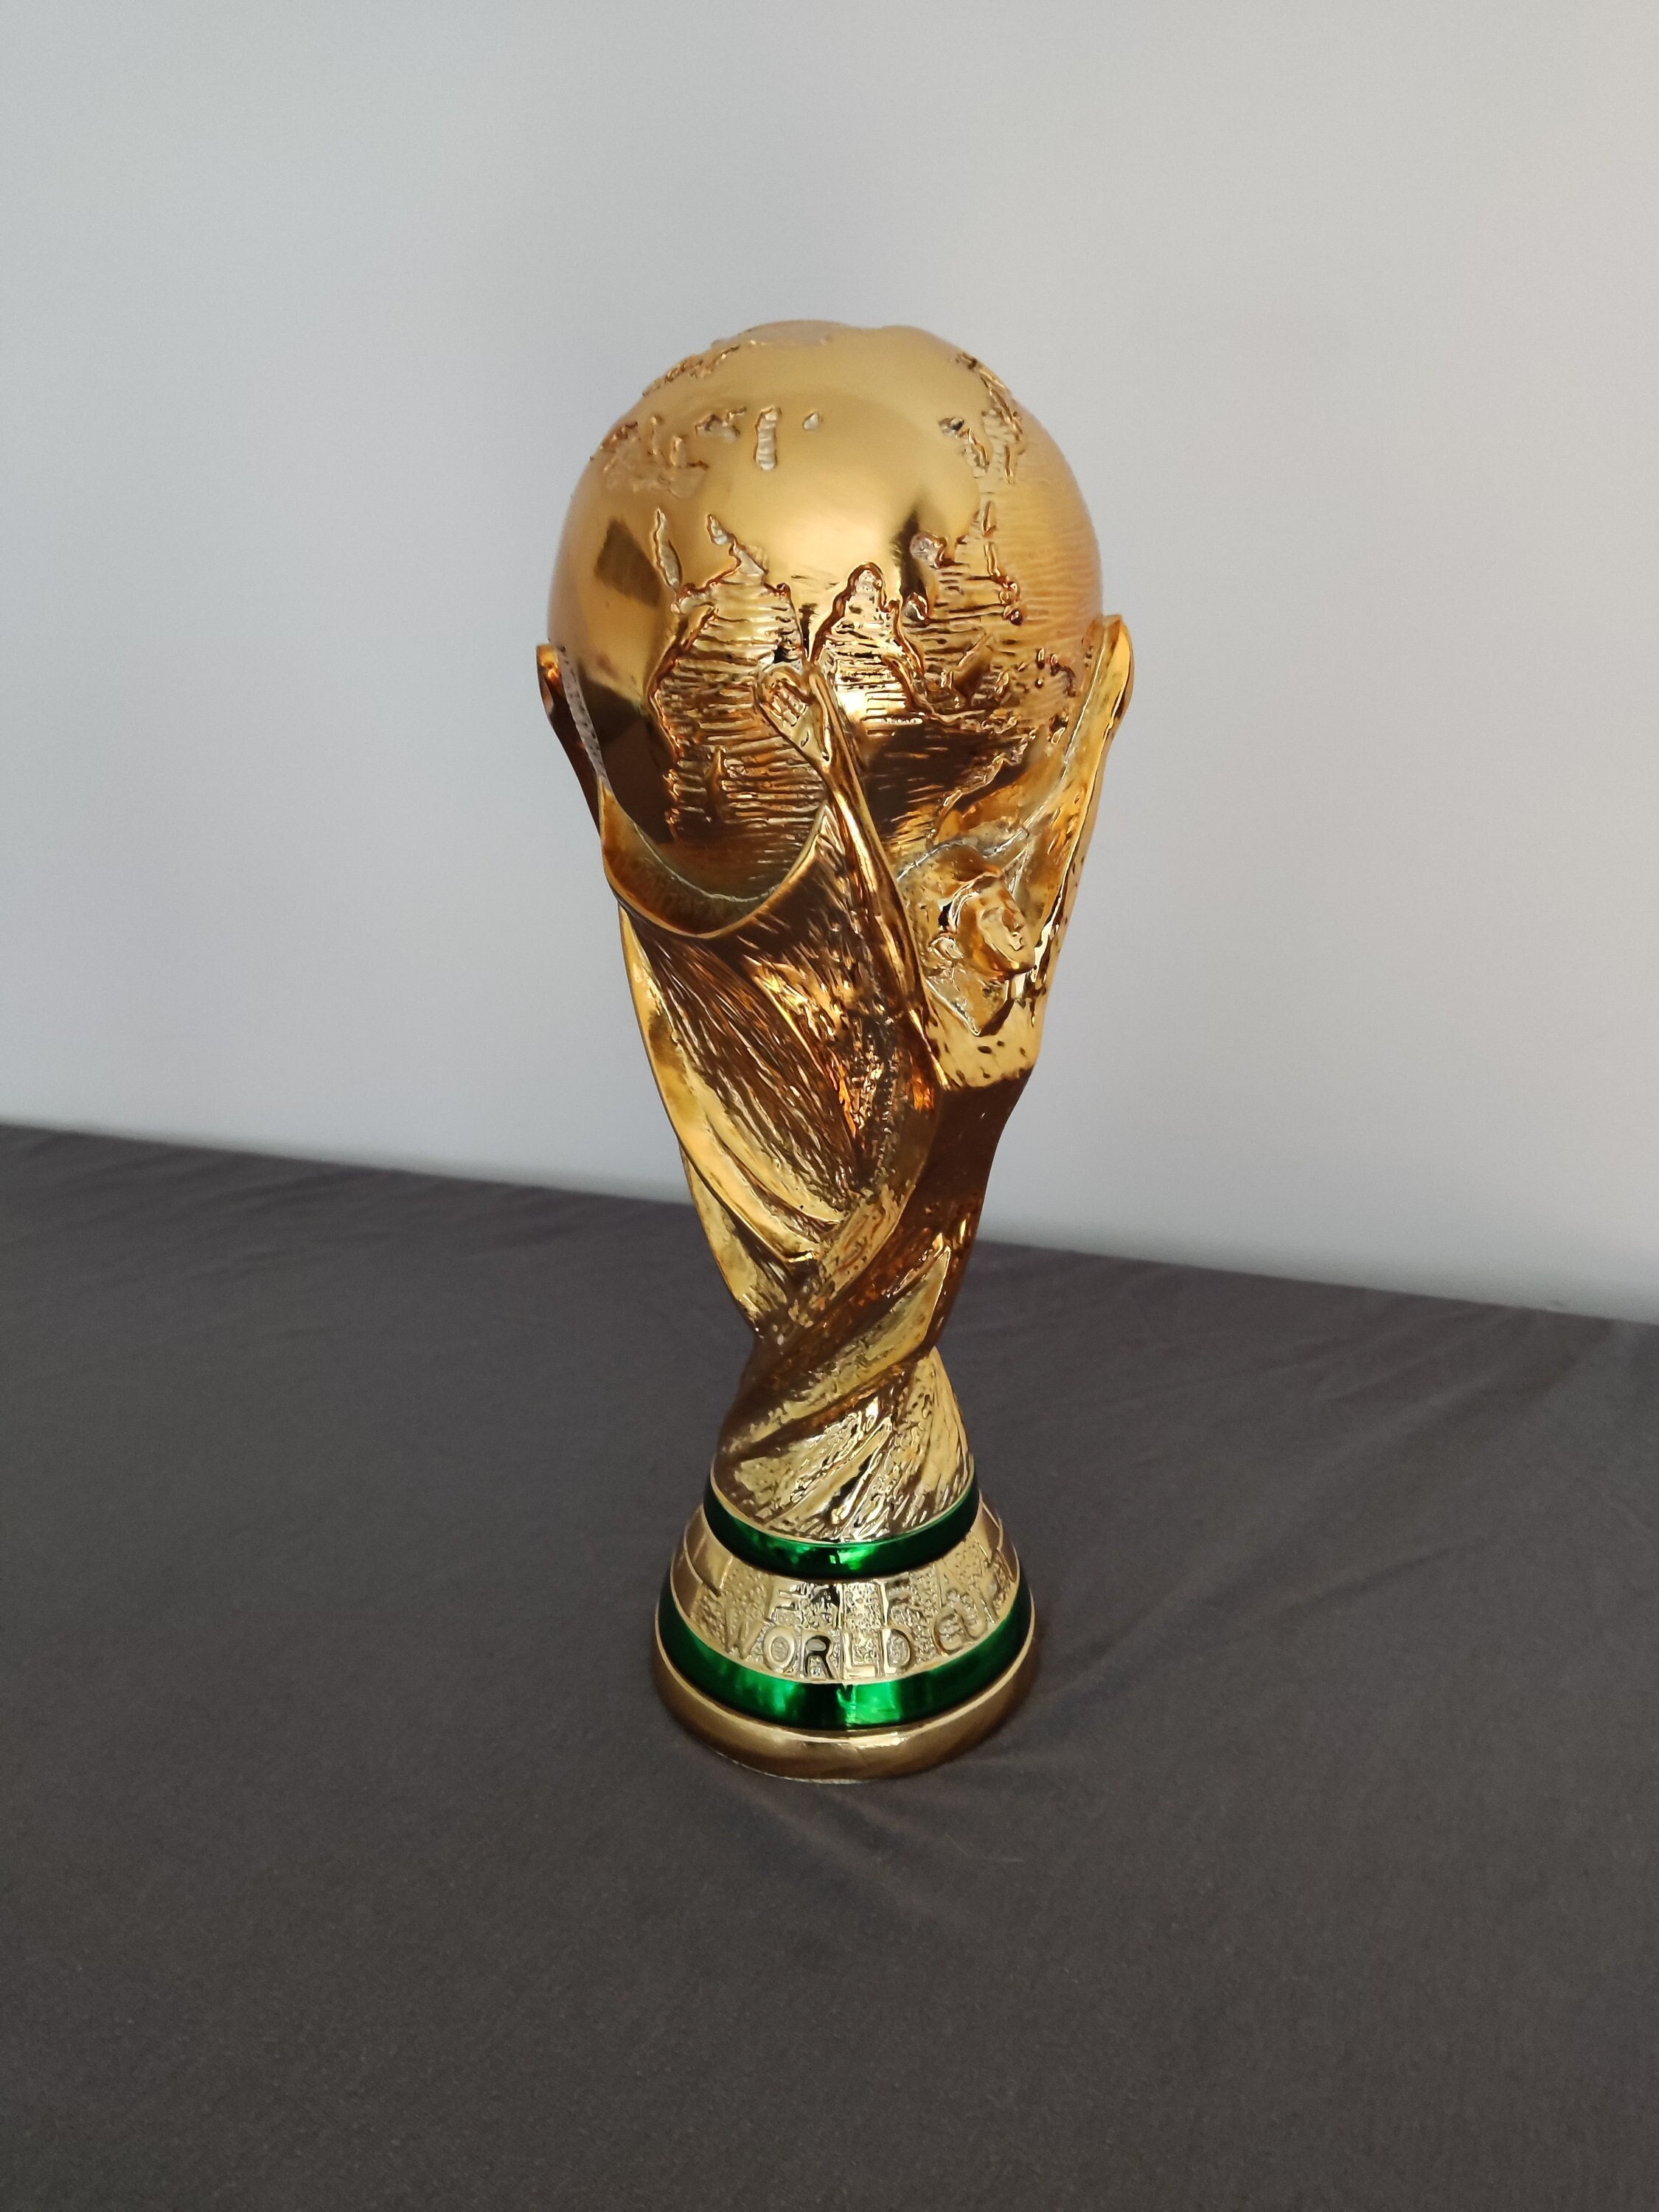 2022 FIFA Replica World Cup Trophy Case – Packaging Of The World